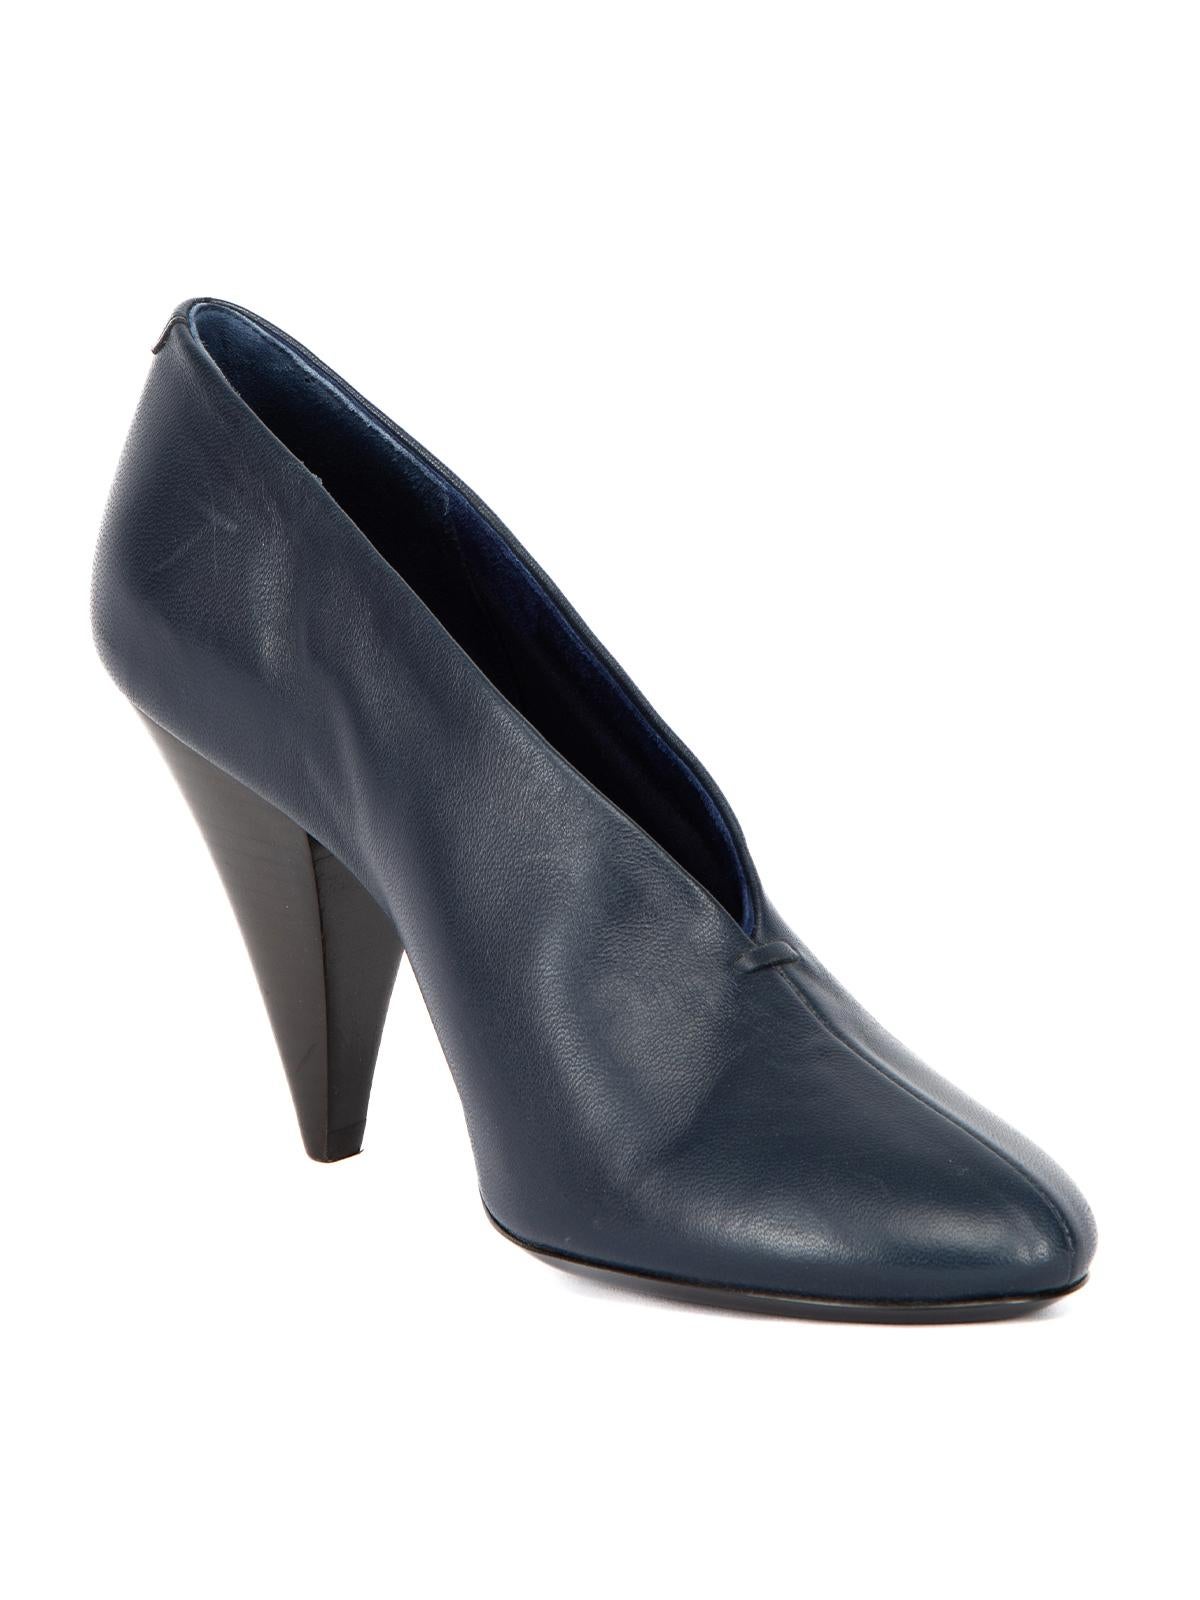 CONDITION is Very good. Hardly any visible wear to boots is evident apart from some very light scuffs on this used Celine designer resale item.  Details  Navy blue Leather Almond toe Boot like heel Slip on fastening Brand name on inner and outer